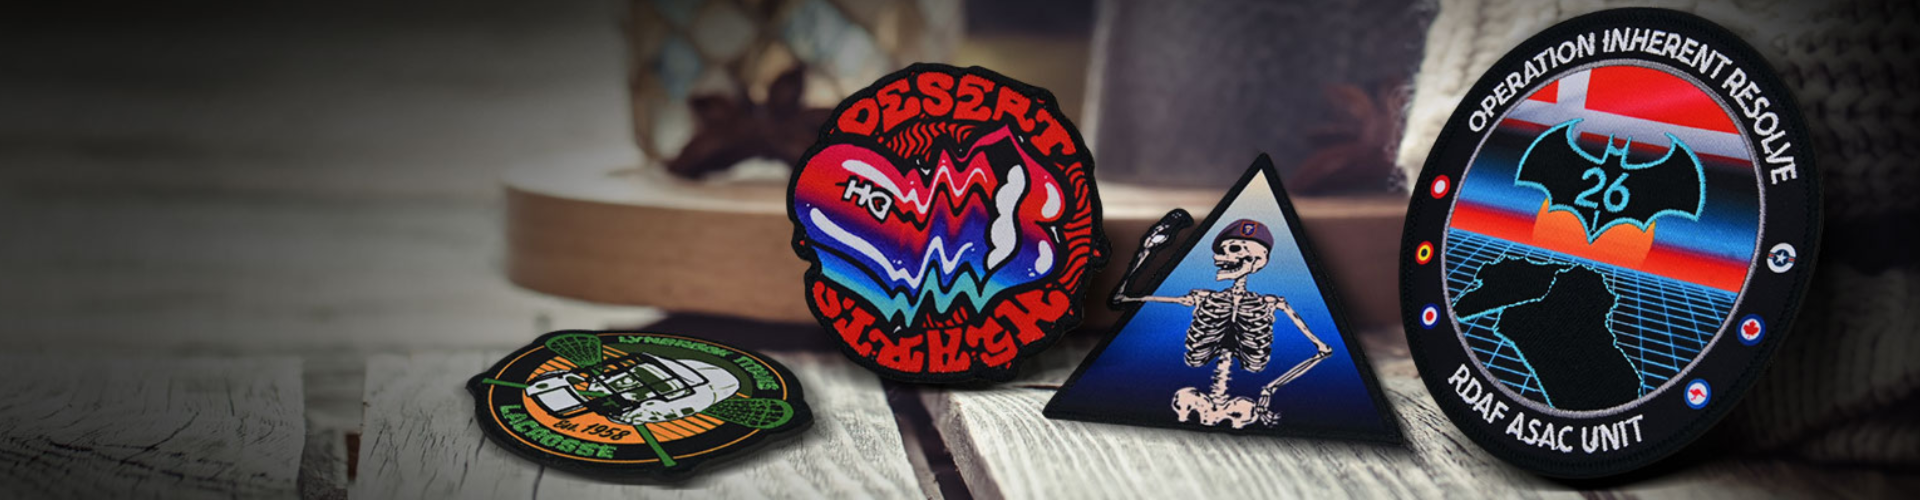 Custom Velcro Patches - { Free Shipping & 20% OFF }